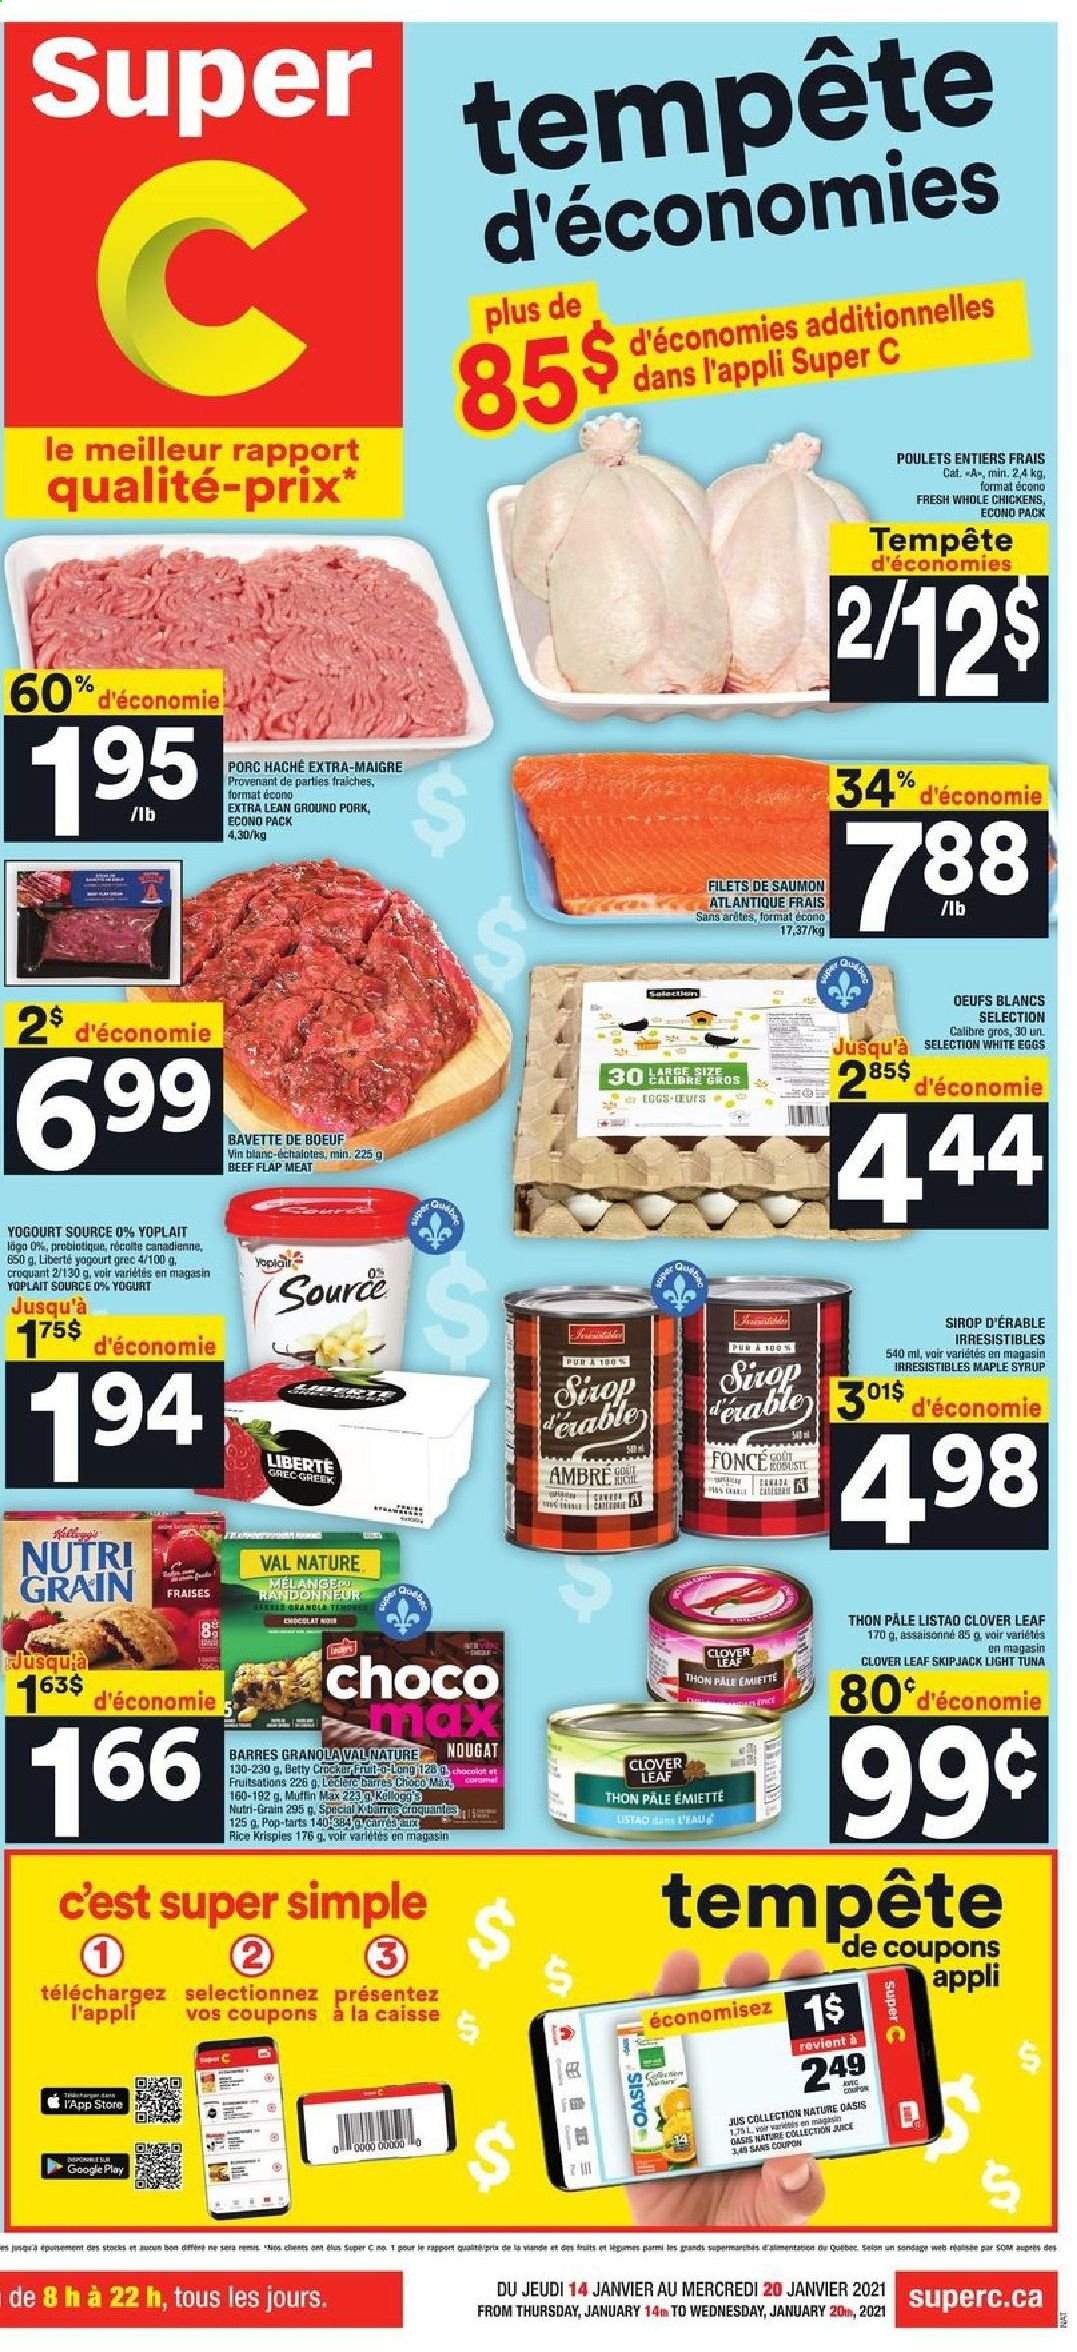 thumbnail - Super C Flyer - January 14, 2021 - January 20, 2021 - Sales products - tuna, Clover, Yoplait, eggs, Pop-Tarts, light tuna, Rice Krispies, Nutri-Grain, maple syrup, syrup, whole chicken, ground pork, granola, nougat. Page 1.